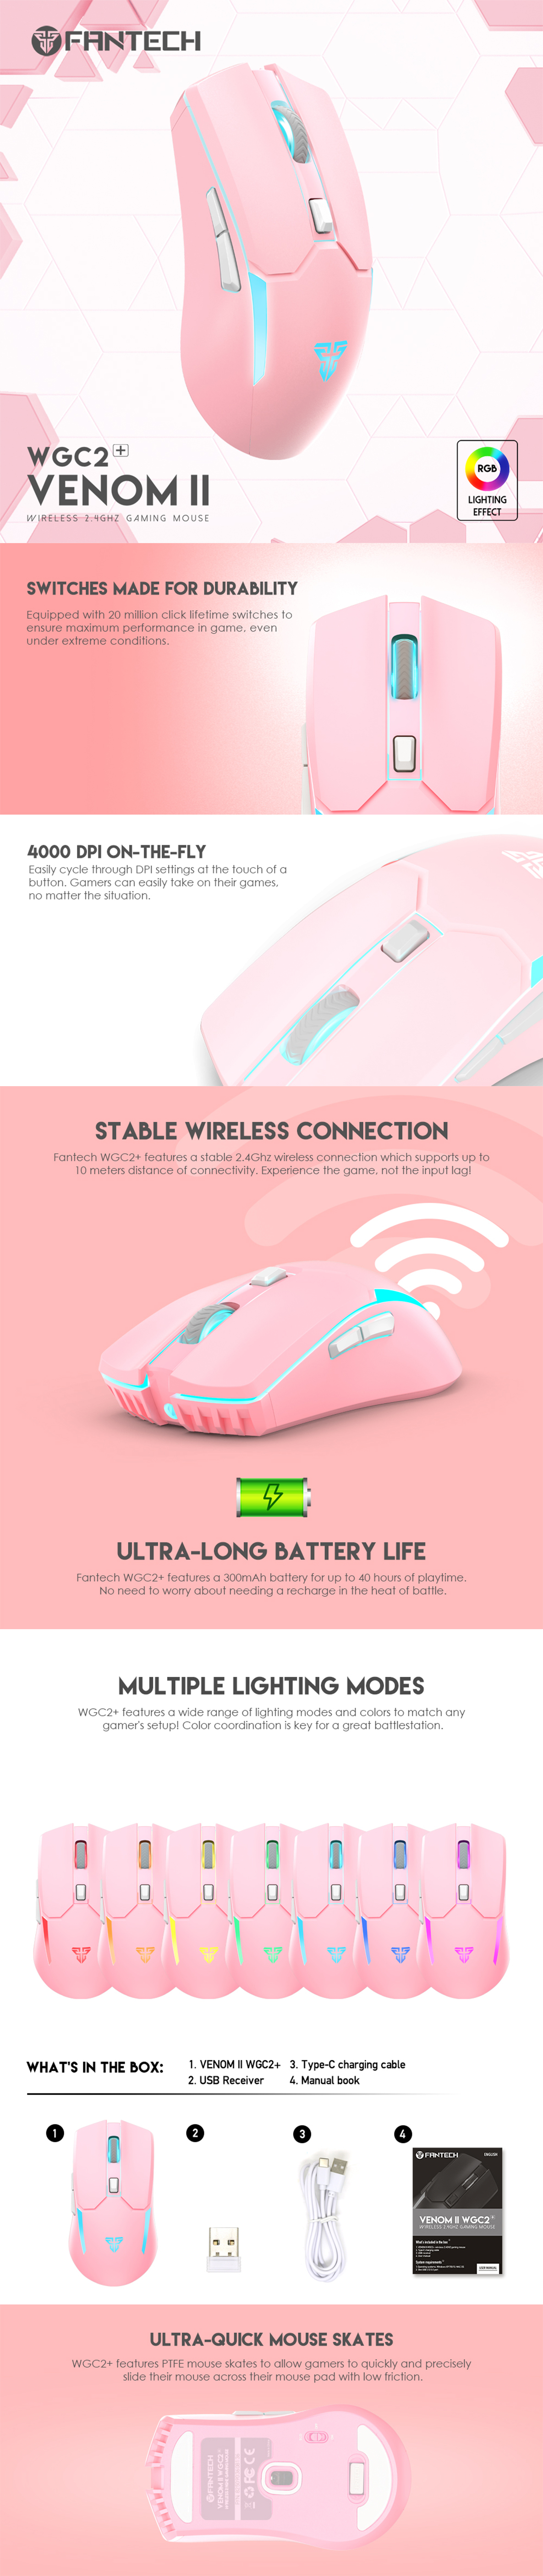 A large marketing image providing additional information about the product Fantech VENOM II WGC2 Wireless Gaming Mouse - Pink - Additional alt info not provided